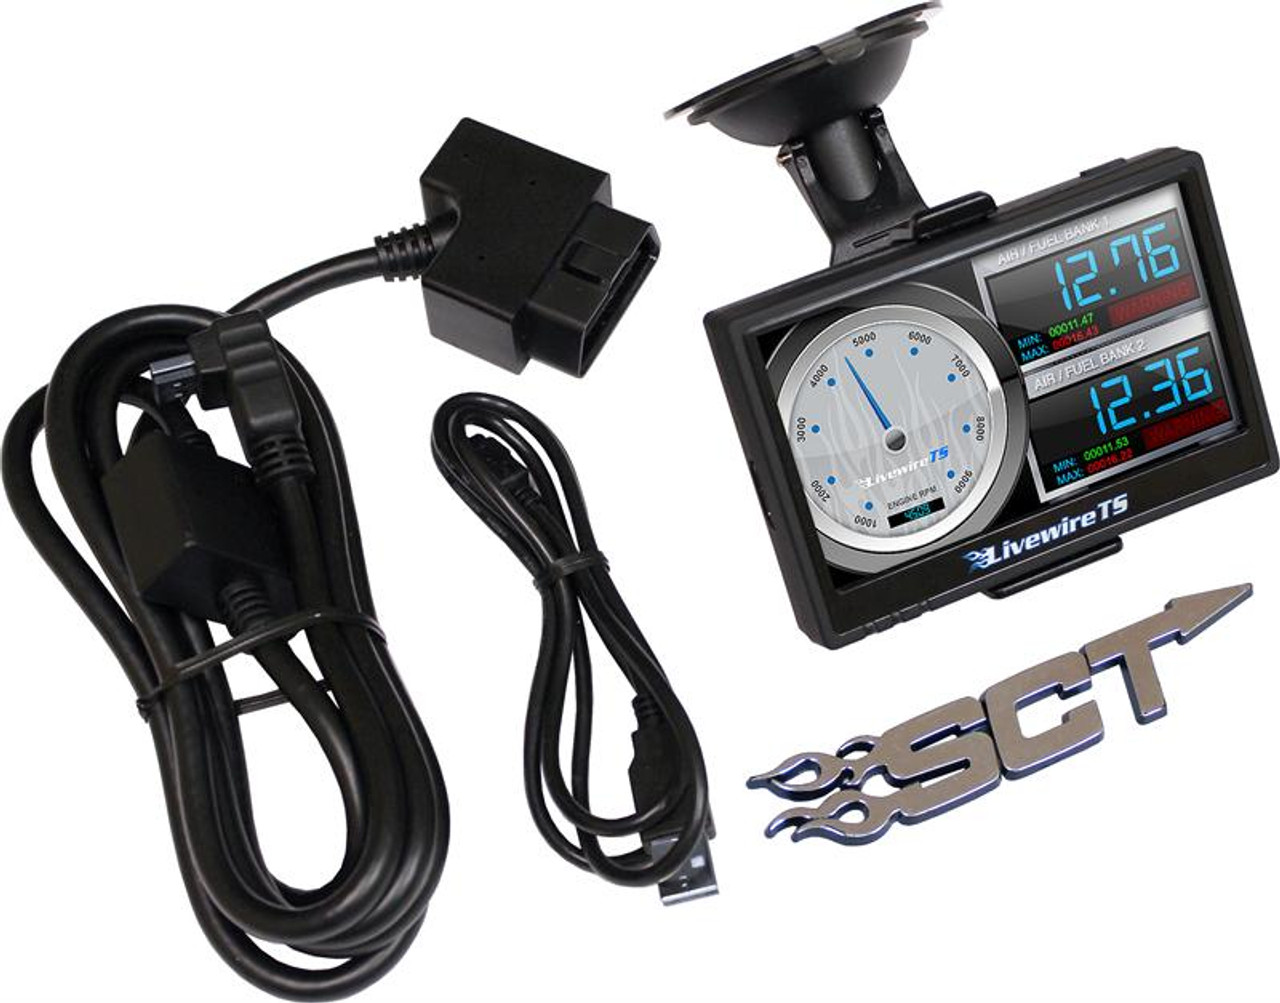  Blessed Performance SCT Livewire TS+ Performance Programmer for 2017 to 2019 Ford 6.7L Powerstroke (5015PBP_6.7_17-19) SCT Full View